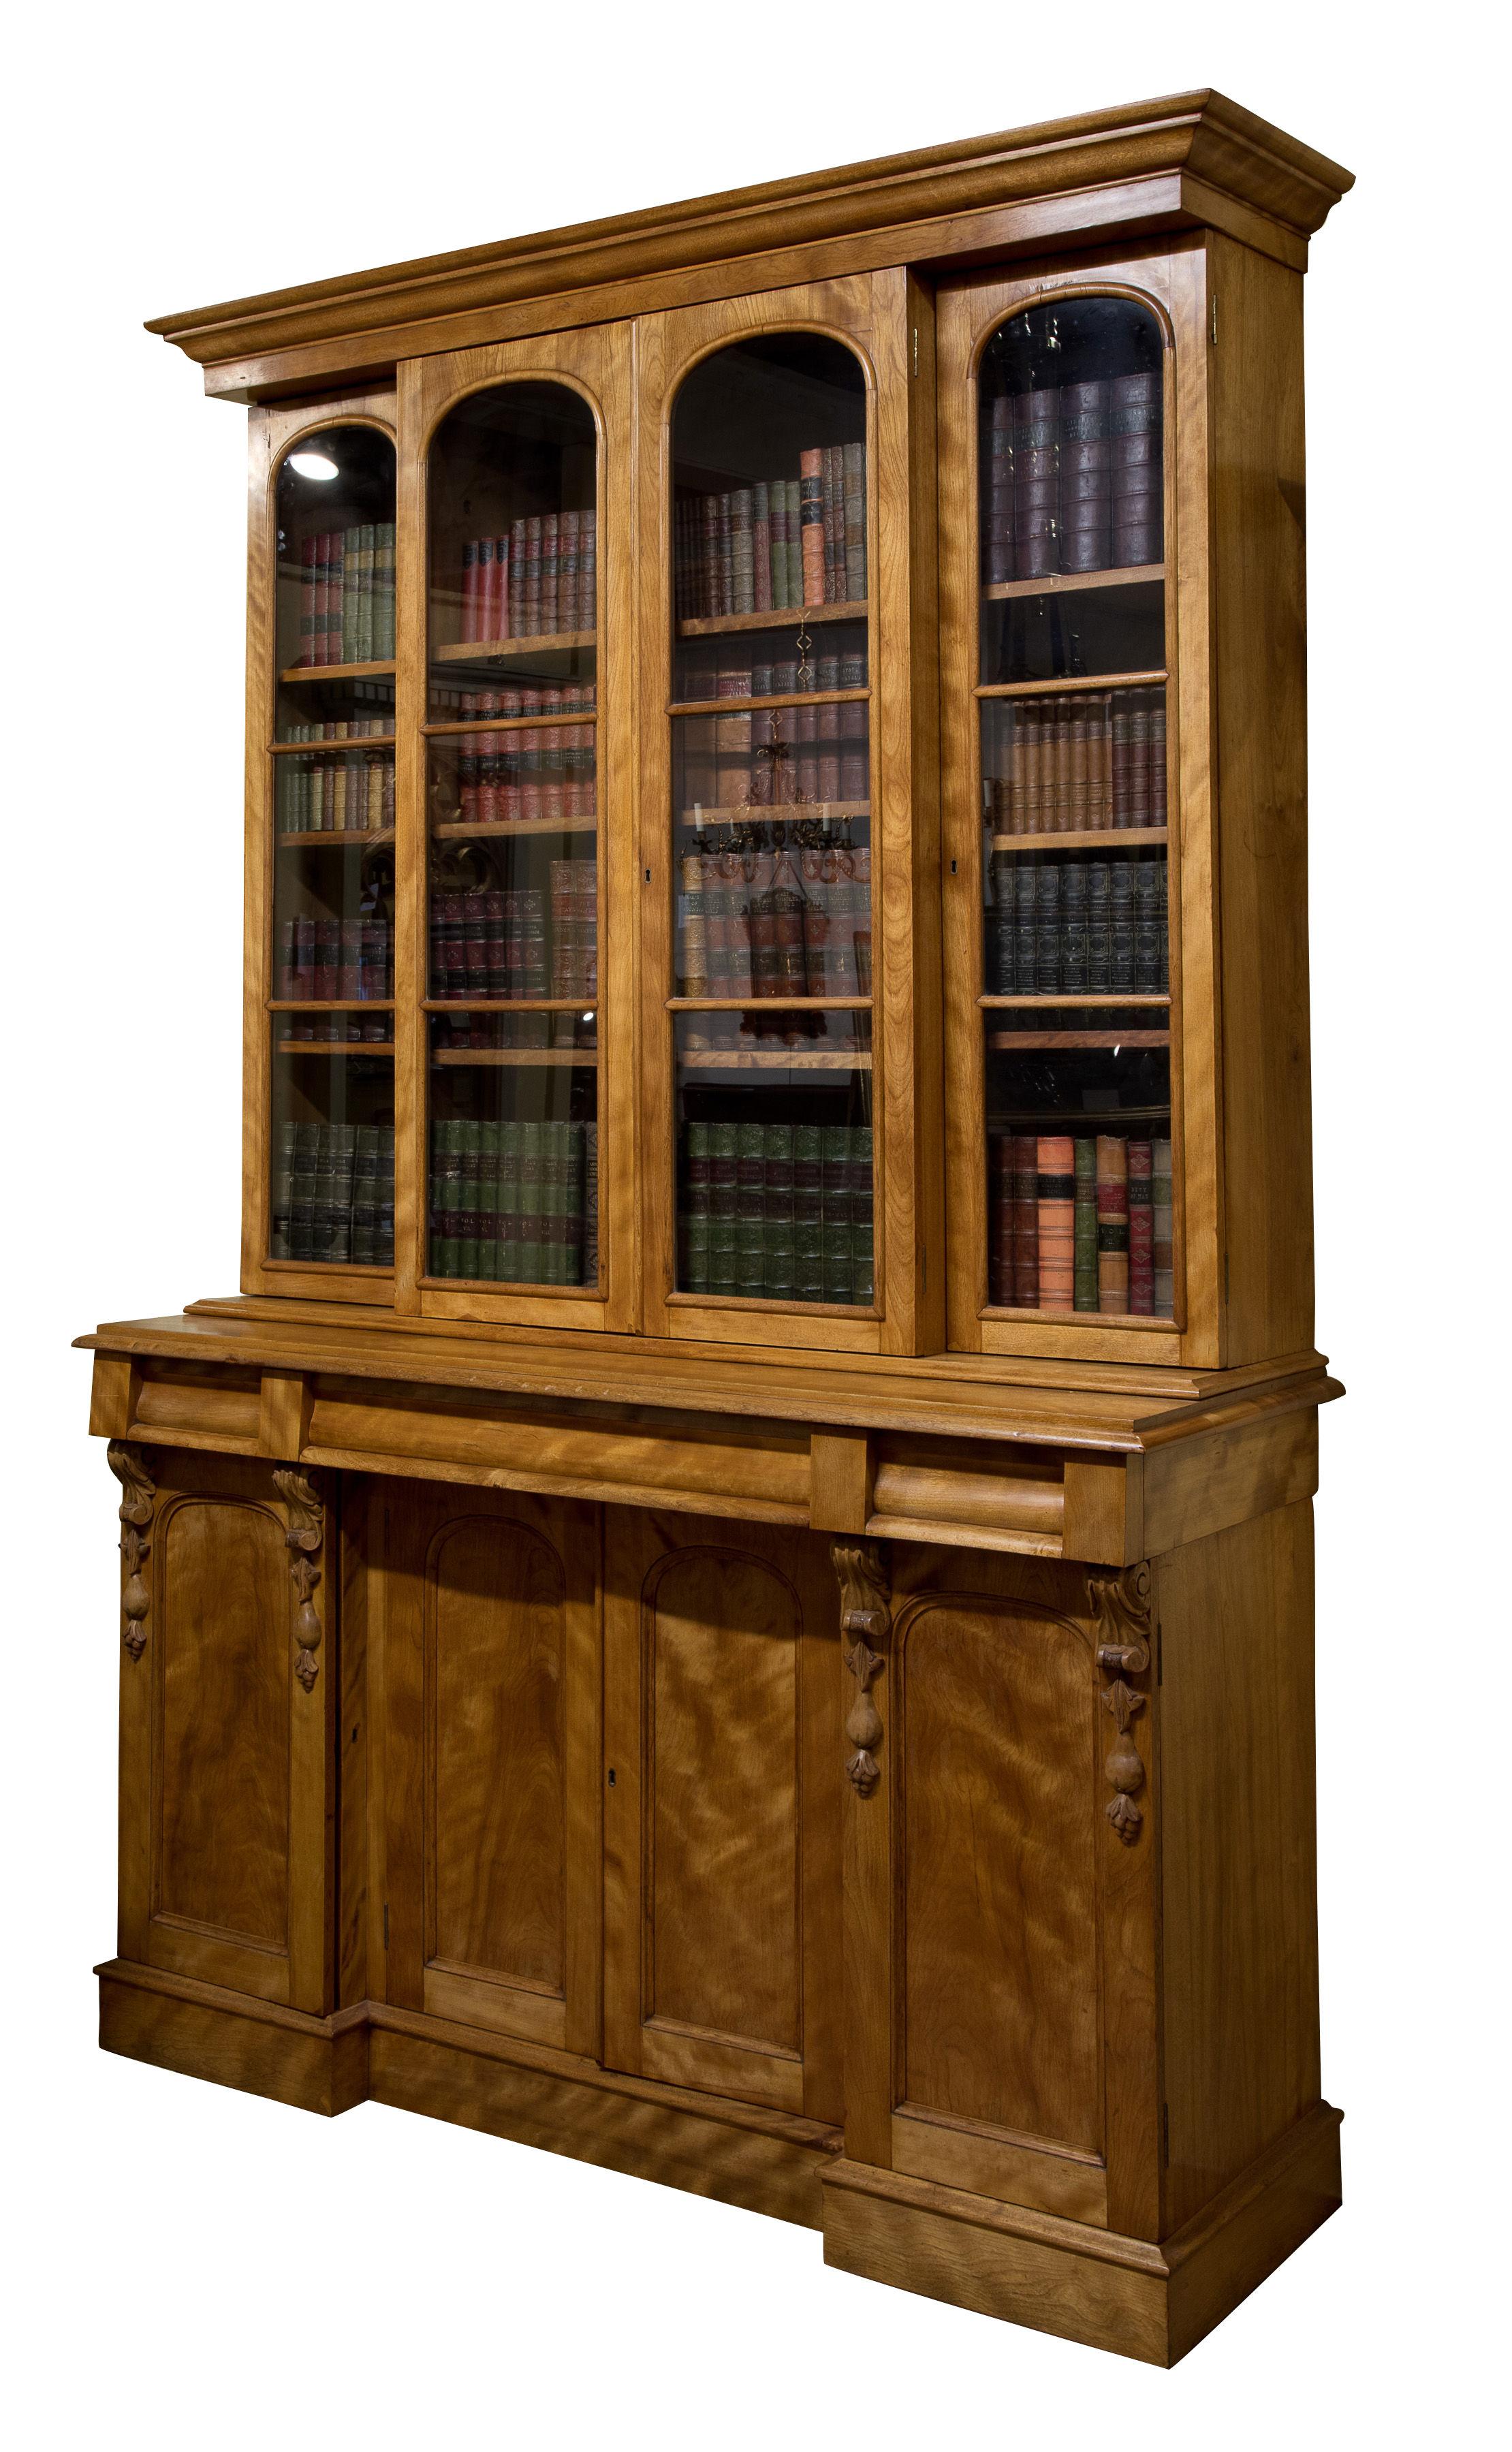 19th century satin walnut breakfront bookcase with 4 glazed doors and 4 paneled doors. Molded drawers,

circa 1850.